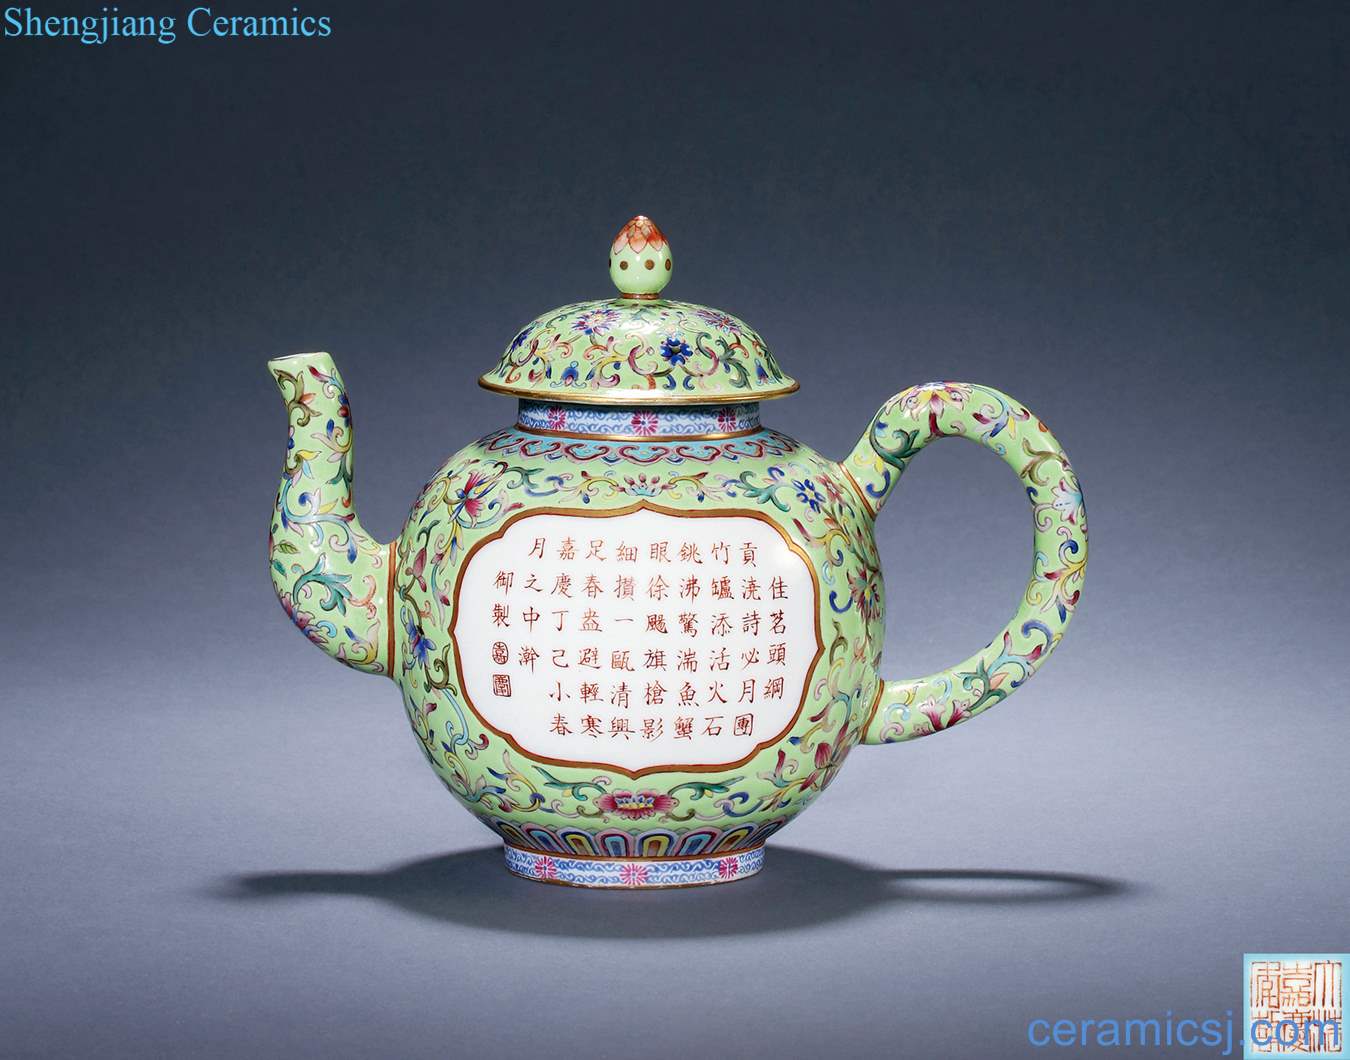 In late qing pastel medallion acknowledged the teapot